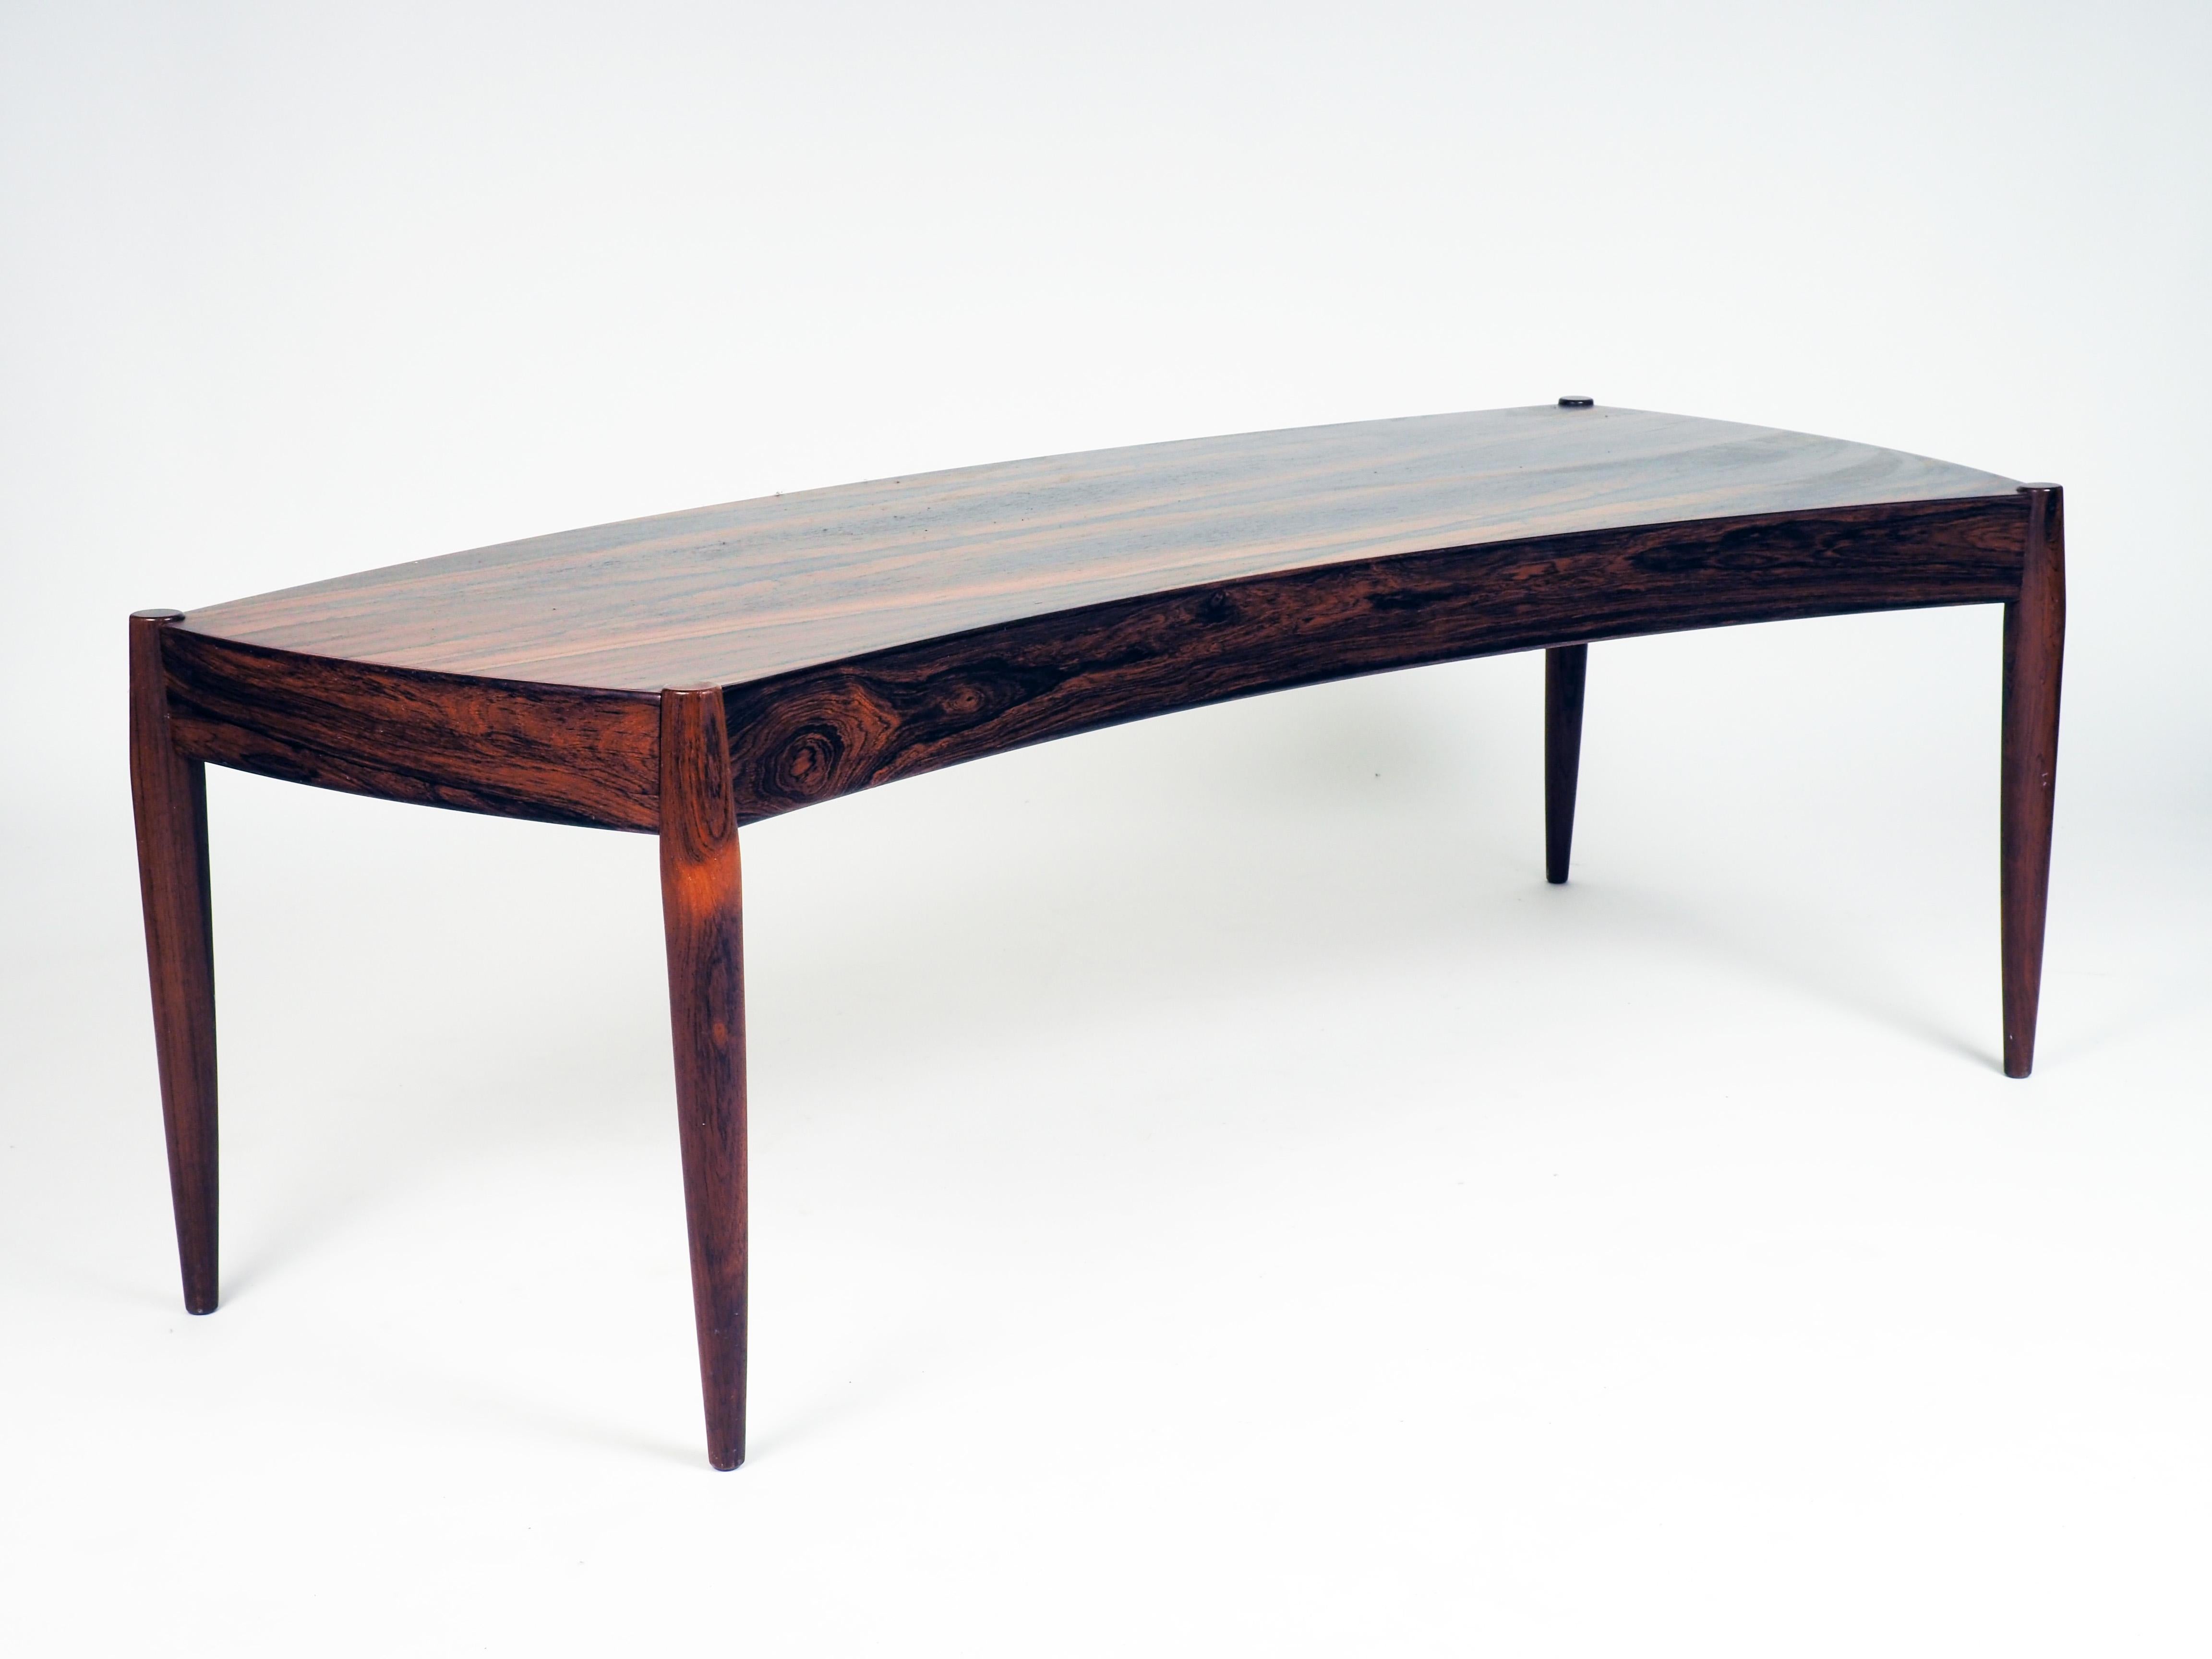 Coffee table in bent shape. Made in rosewood by Trensum, Sweden. The table was designed by the Danish architect Johannes Andersen.